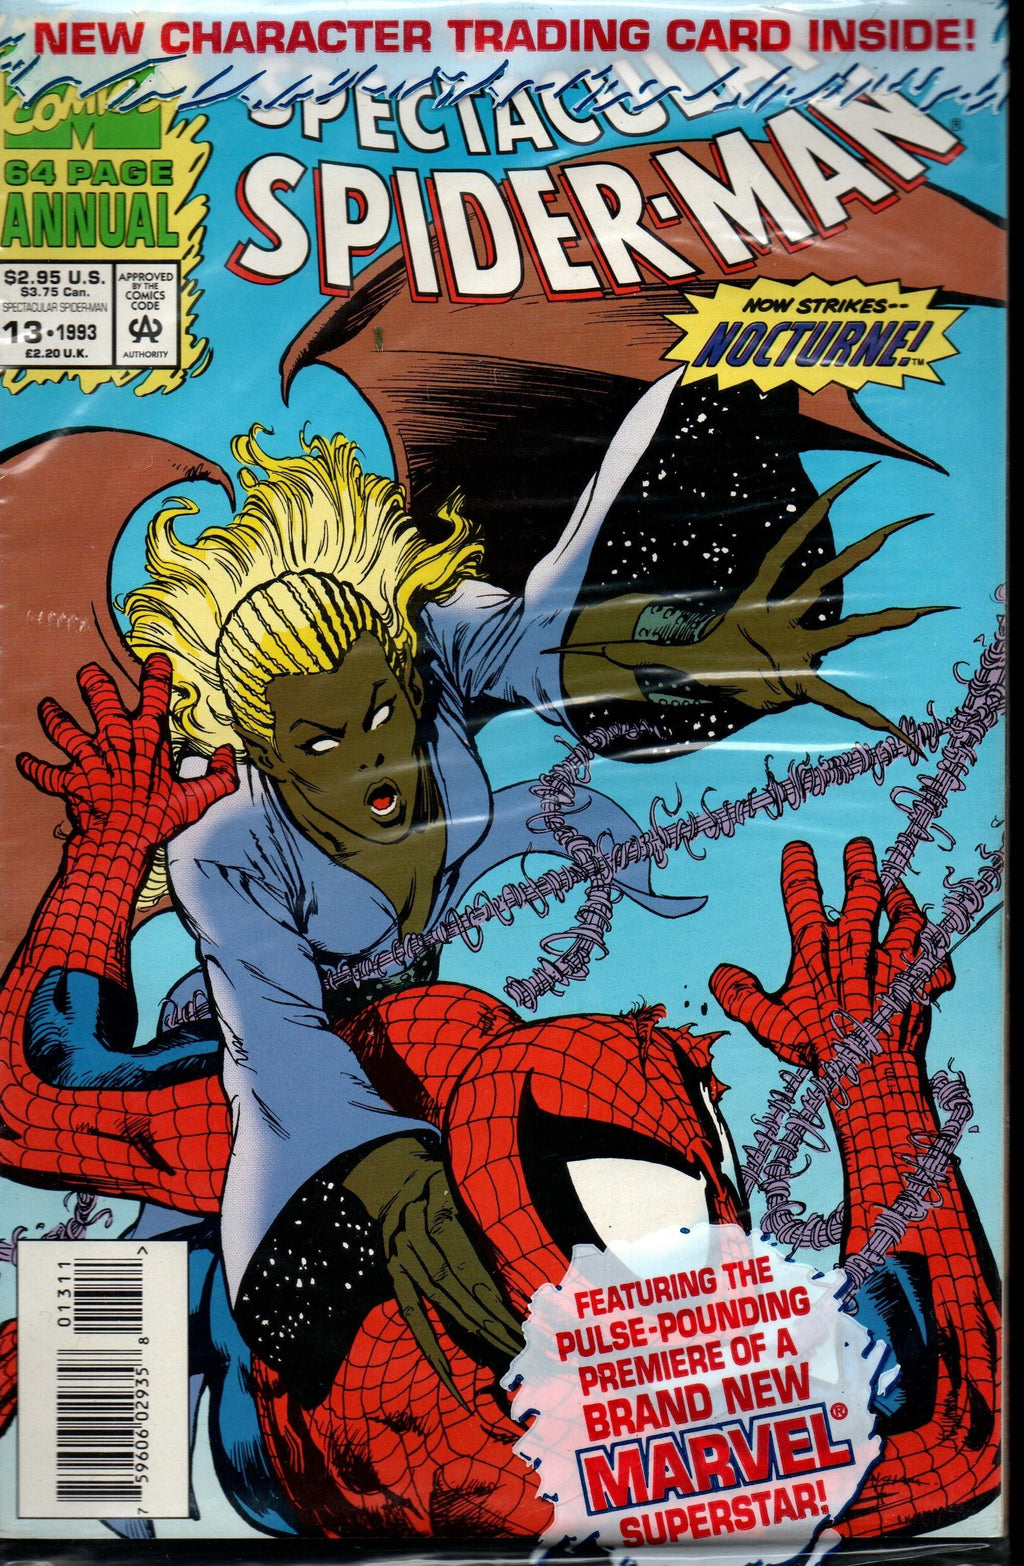 THE SPECTACULAR SPIDER-MAN #13P (1976 1ST SERIES) 1992 ANNUAL